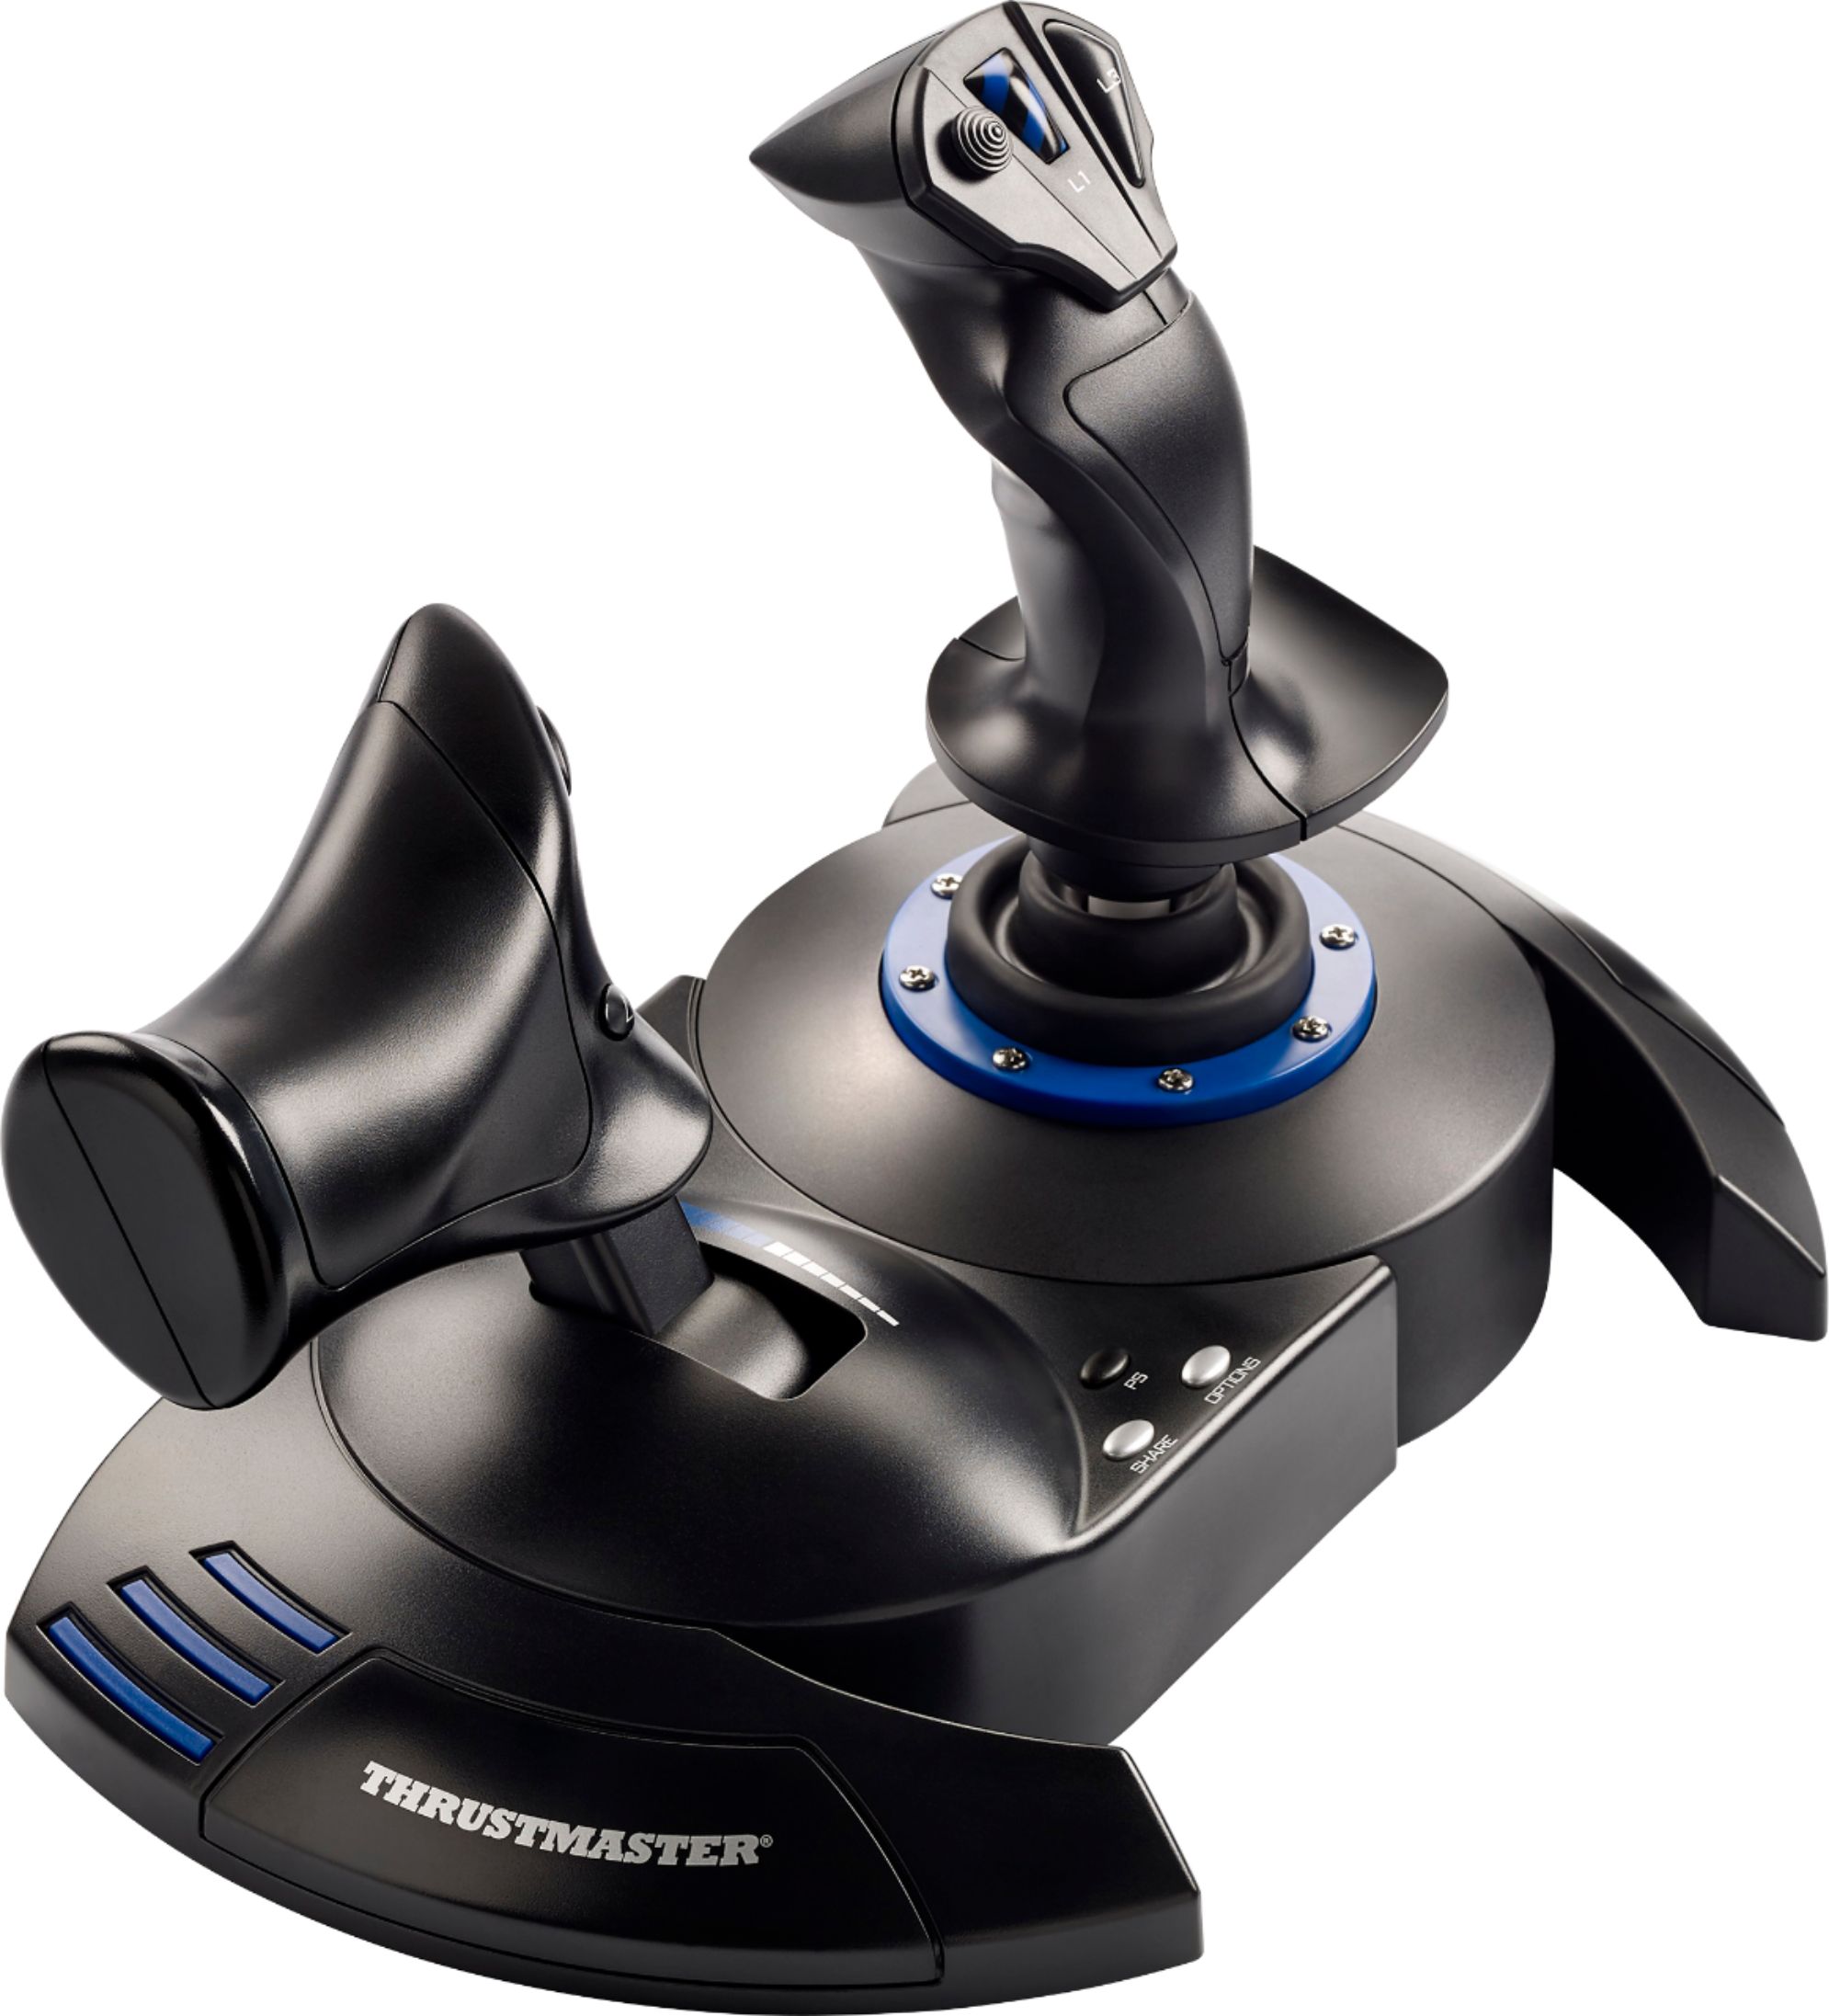 PS5 Ace Combat 7 Skies Unknown Flight Stick for PlayStation®4